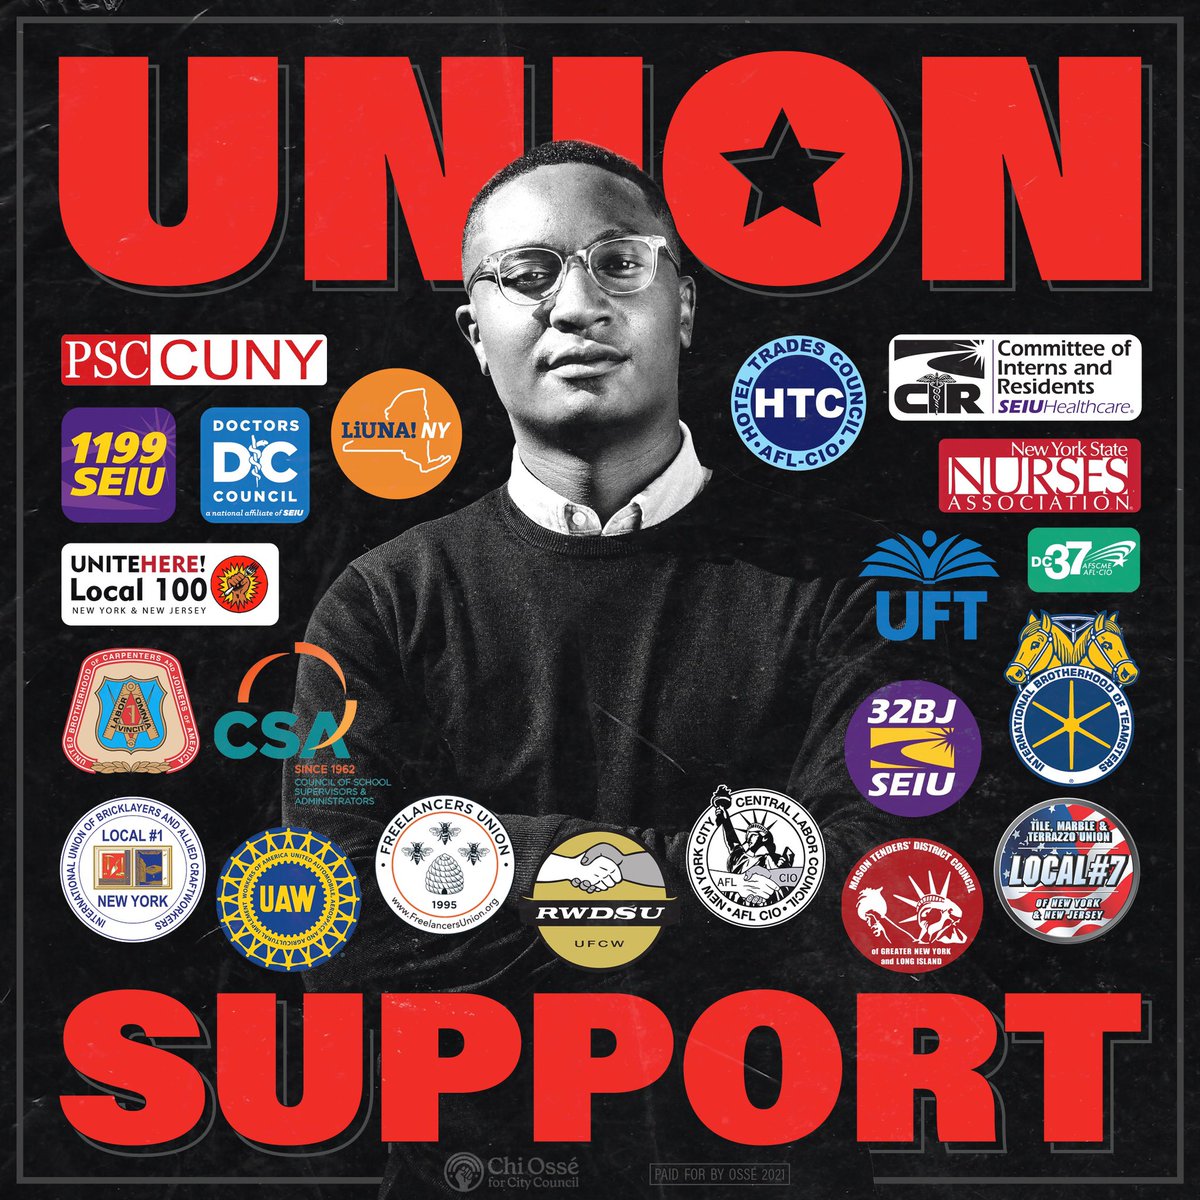 Super stoked to have all of this union support for my general election! 

From healthcare workers and carpenters to hotel workers and teachers, I’m looking forward to fighting for the working class of NYC alongside these fearless unions. 

Vote Ossé for City Council on Nov. 2nd!